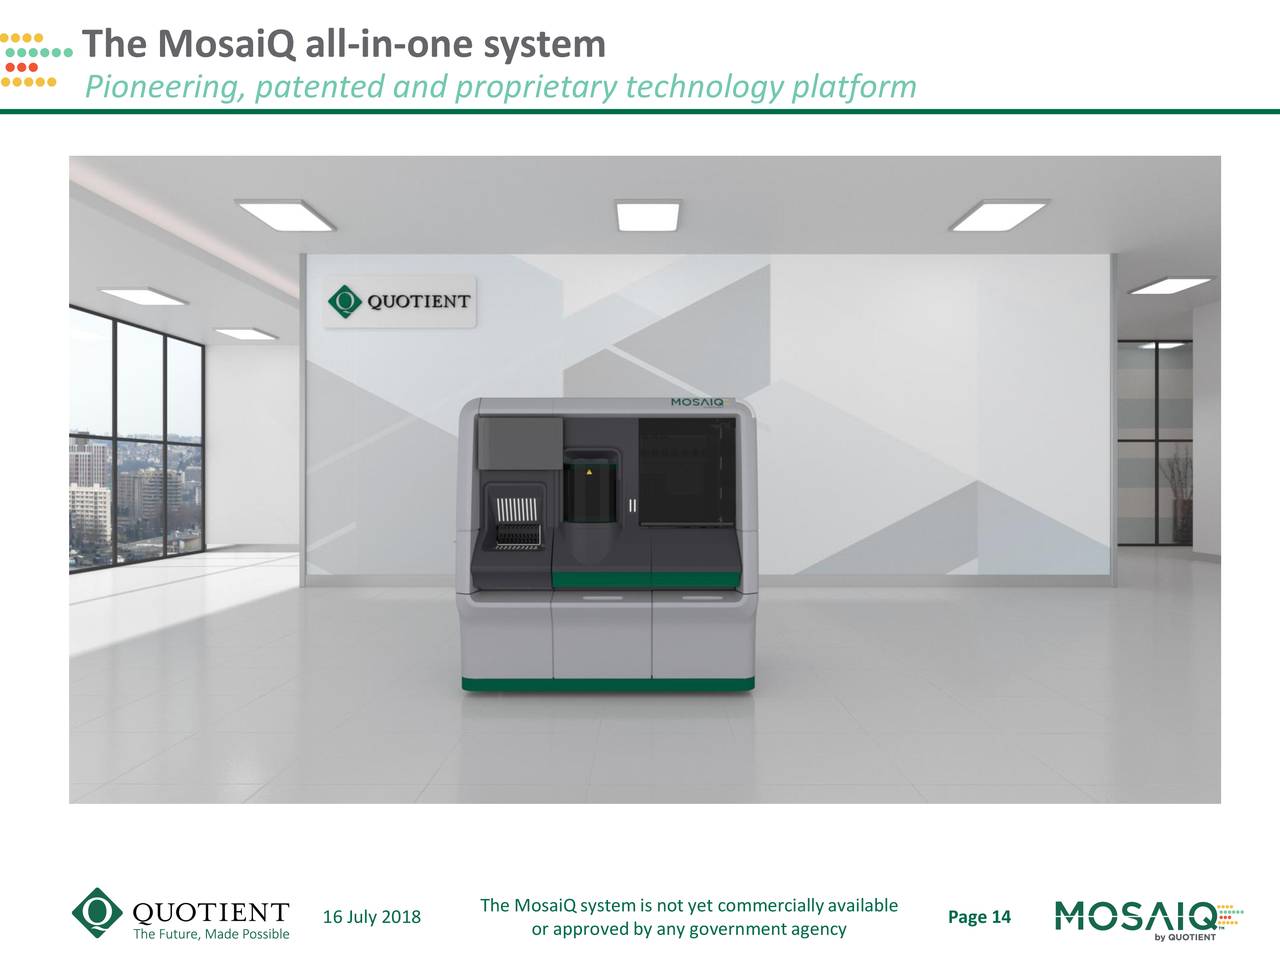 The MosaiQ all-in-one system